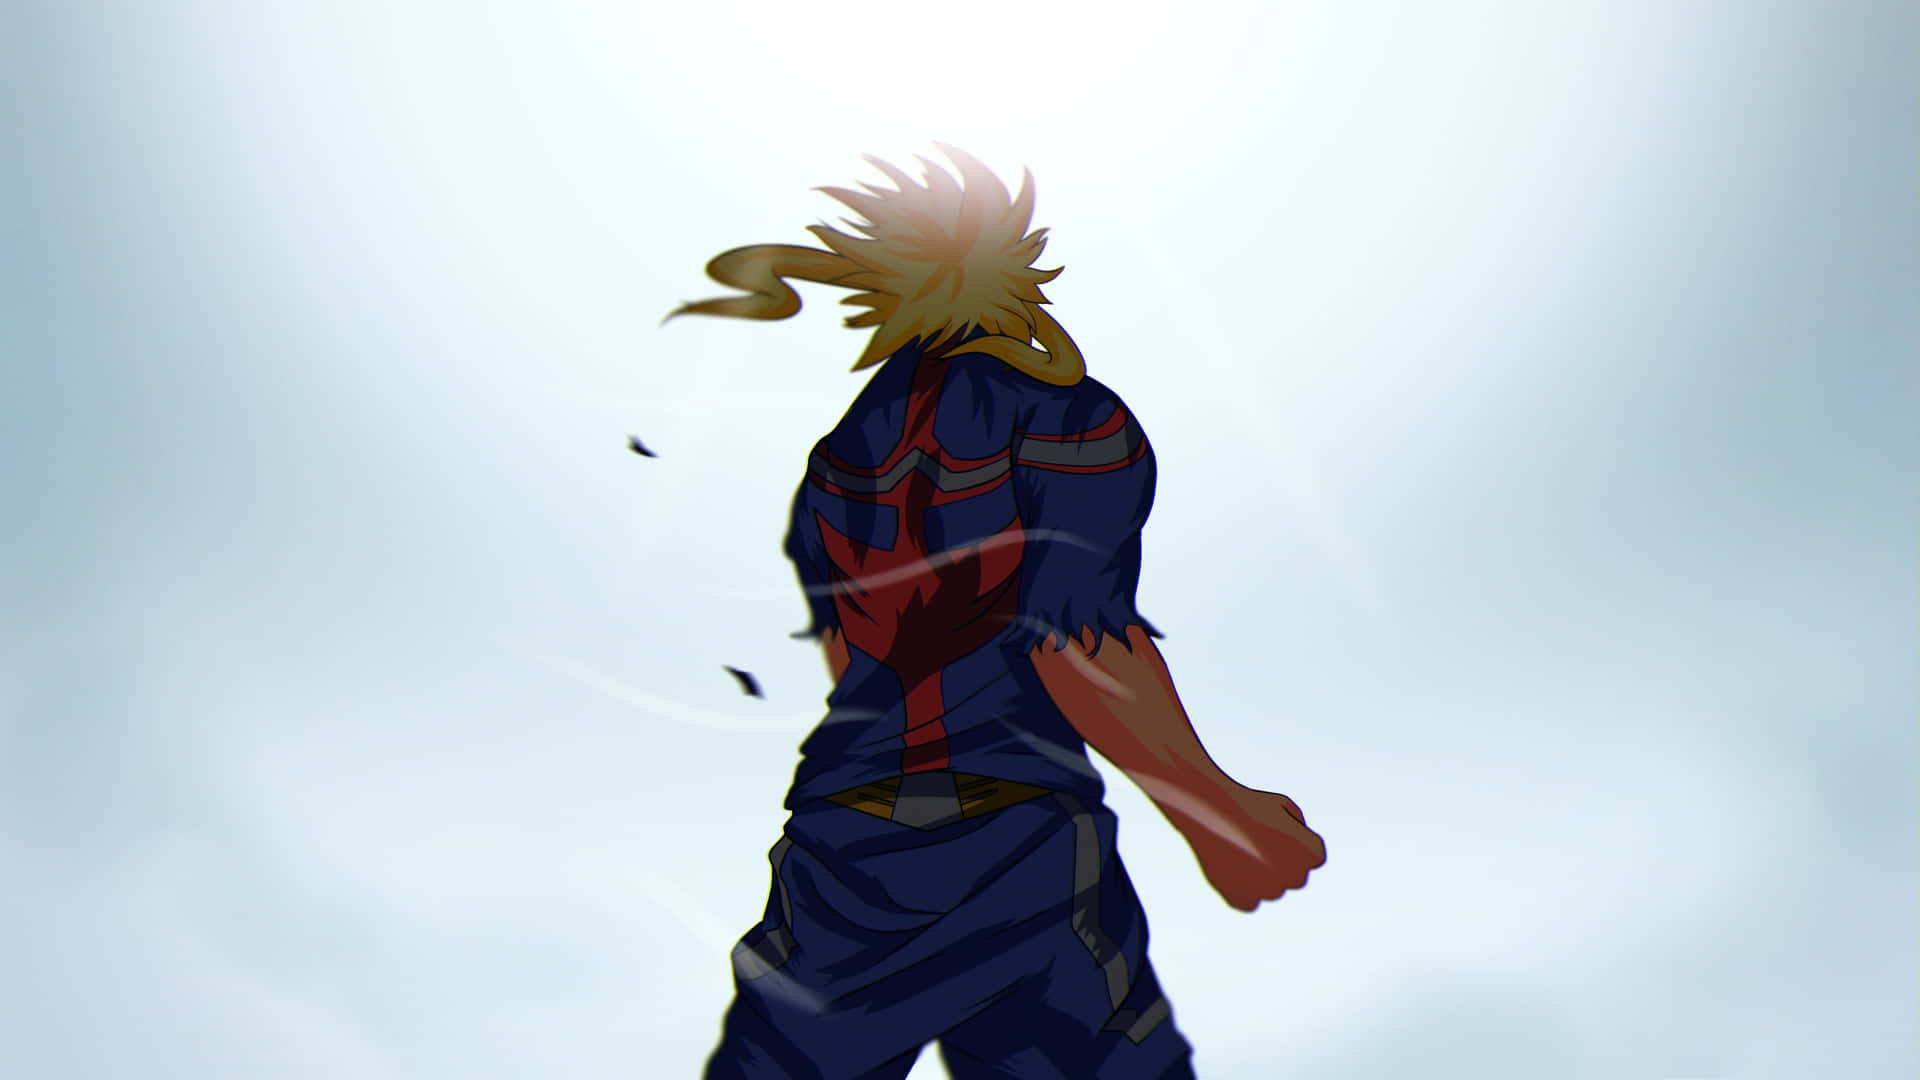 Picture Of All Might Facing The Sun